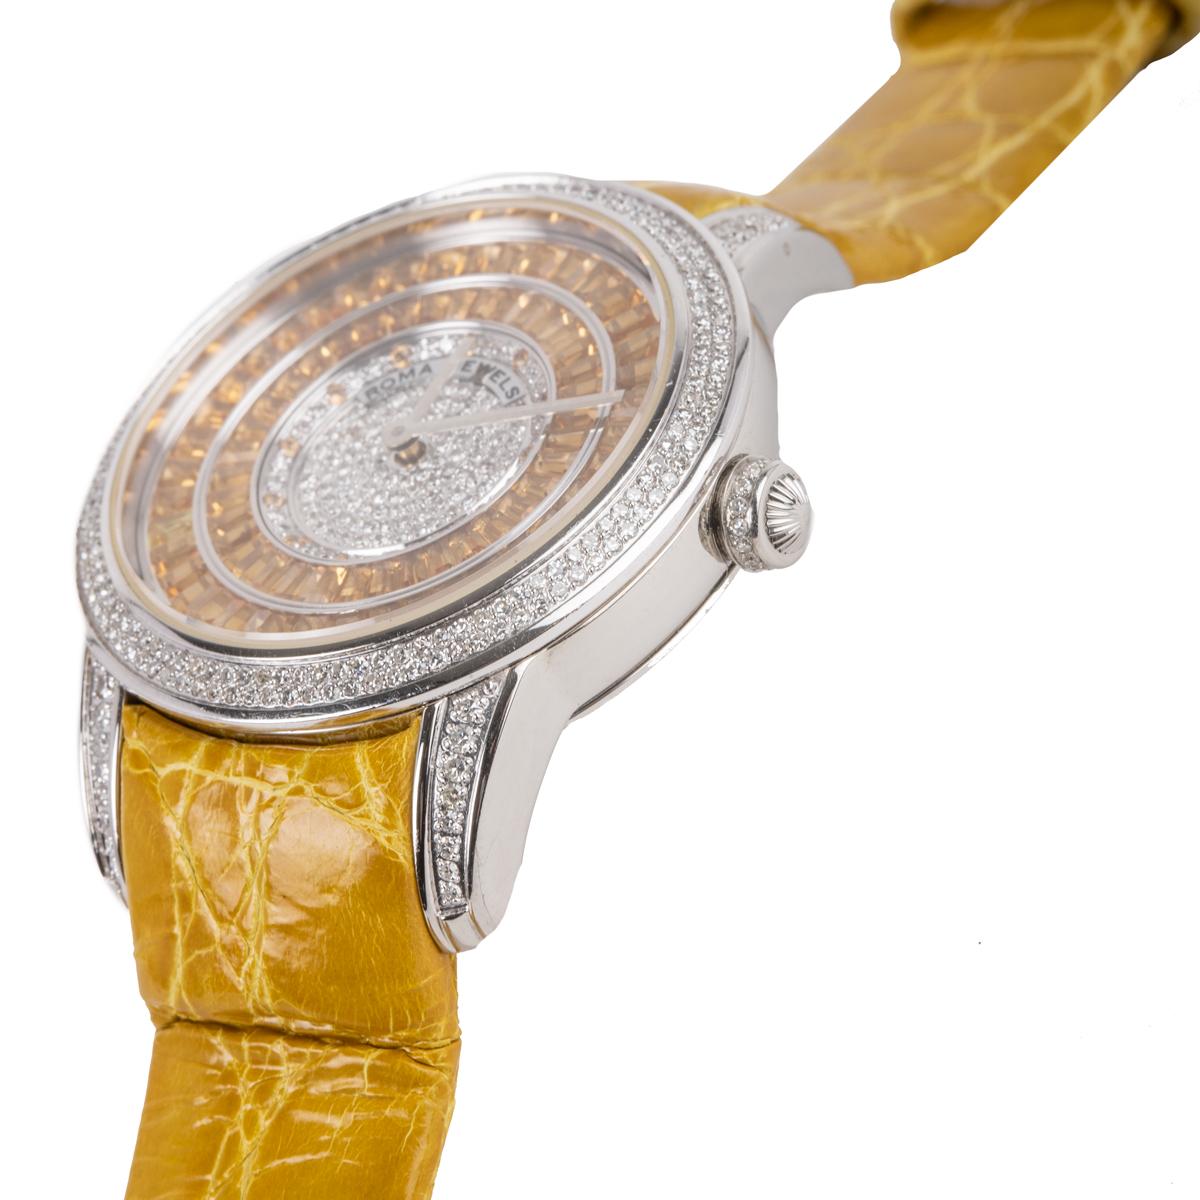 This watch features citrine stones in baguette-cut and round cut diamonds embedded on the face of the watch. This watch features automatic movement and is made with stainless steel and fine leather.